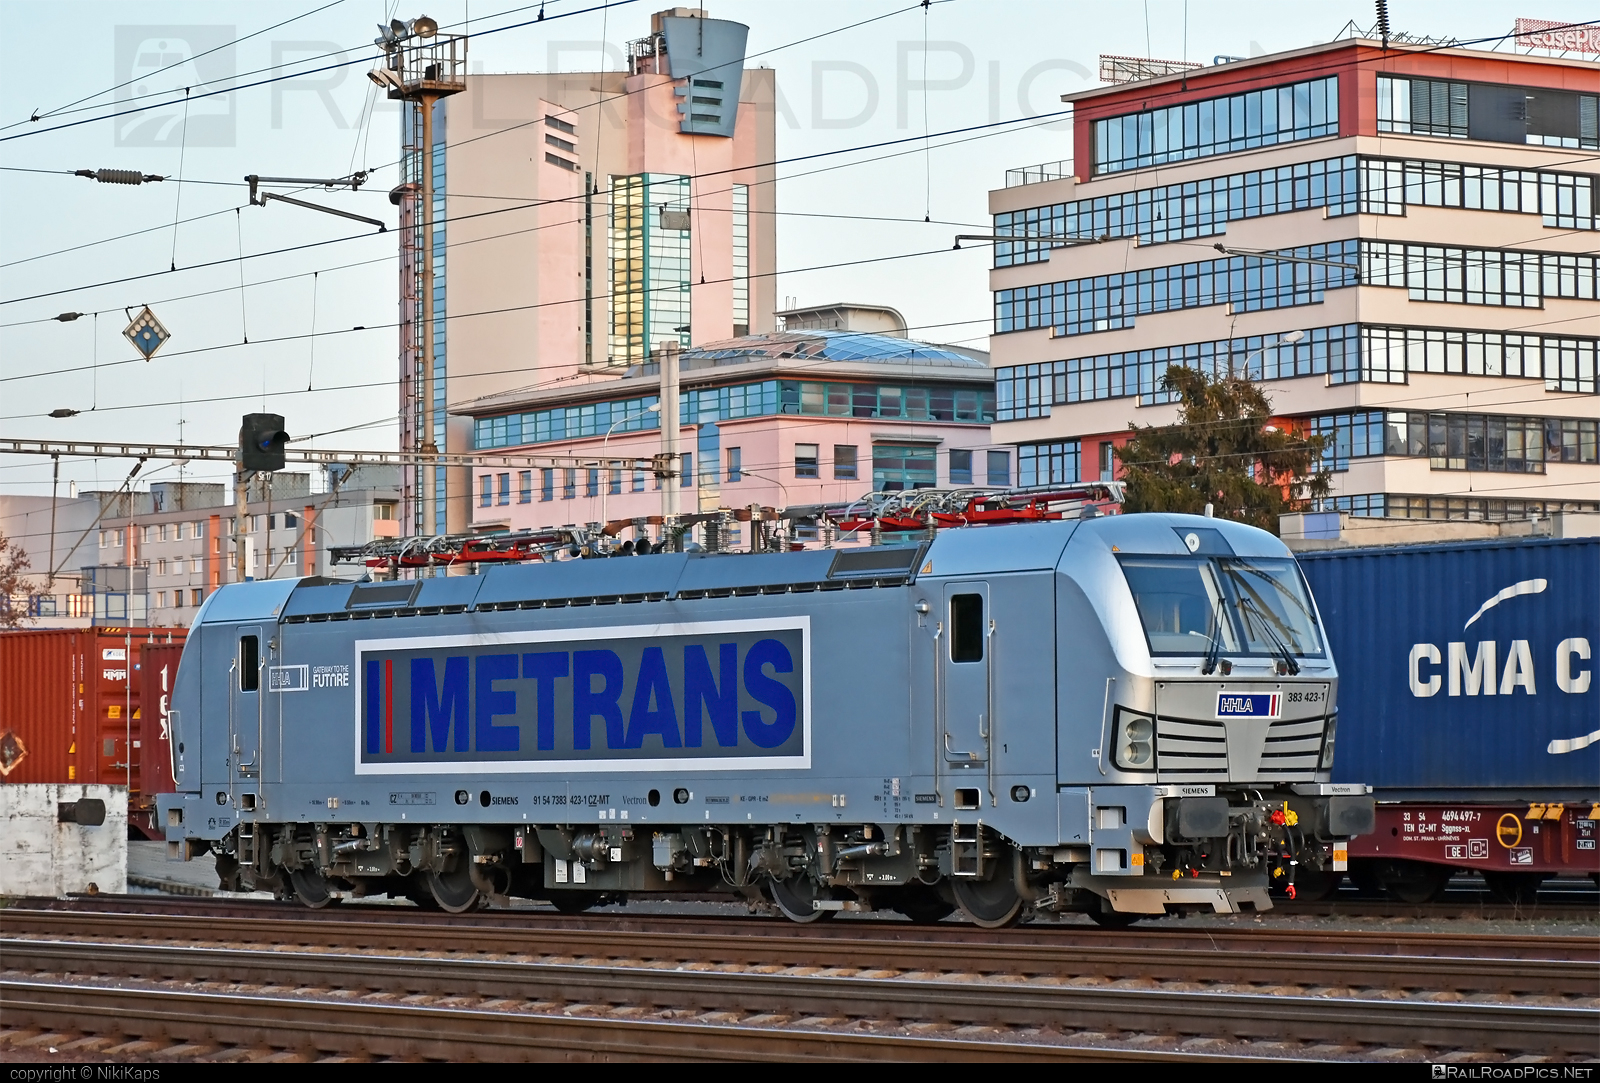 Siemens Vectron MS - 383 423-1 operated by METRANS, a.s. #hhla #metrans #siemens #siemensVectron #siemensVectronMS #vectron #vectronMS